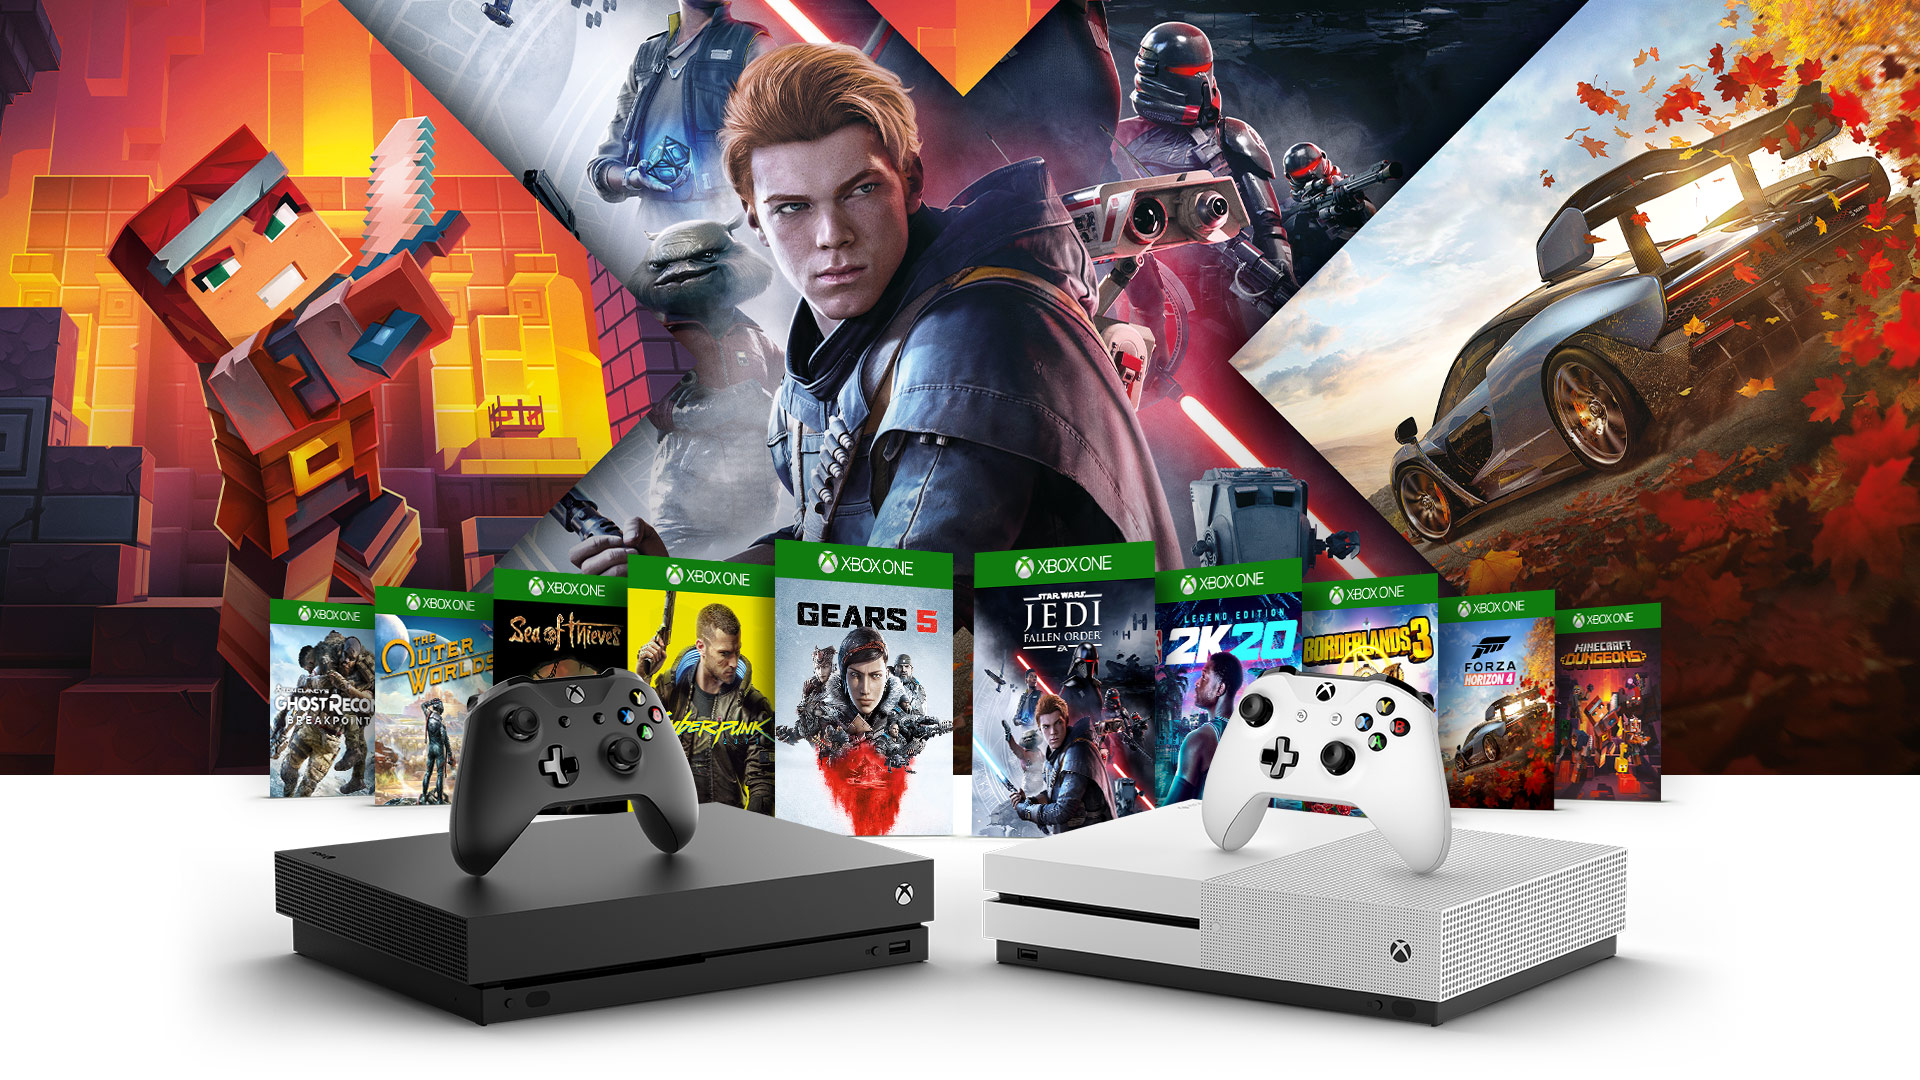 Xbox One X and Xbox One S and box art for Gears 5, Star Wars Jedi fallen order, Cyberpunk 2077 and other games